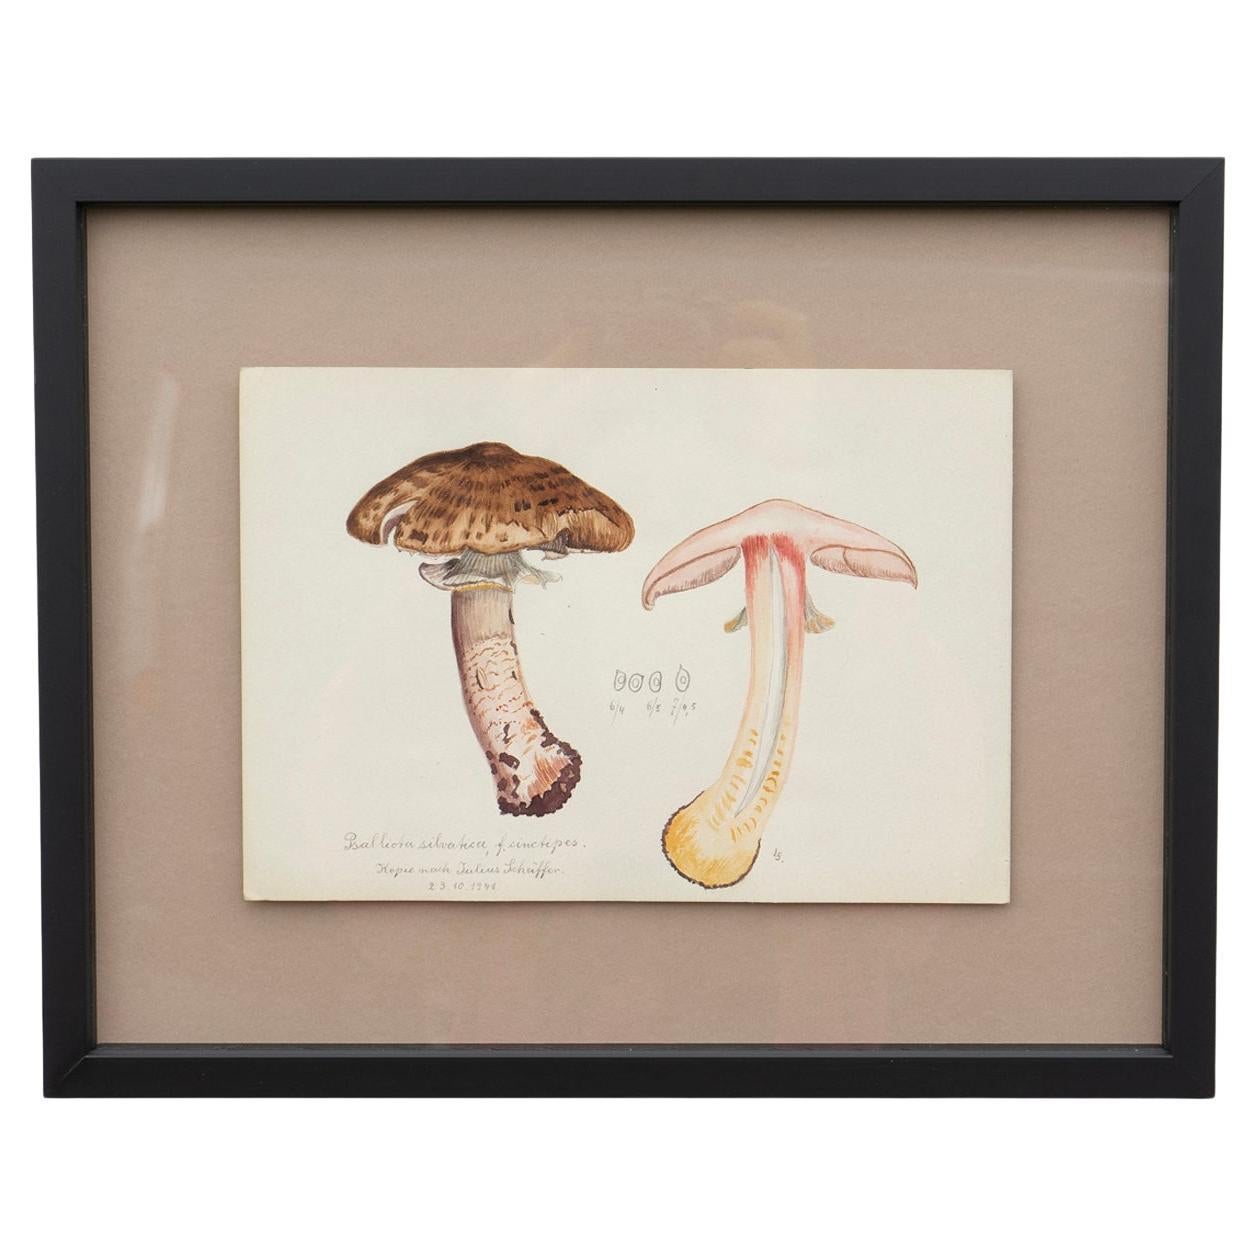 Original Mycology Watercolour Depicting a Scaly Wood Mushroom by Julius Schäffer